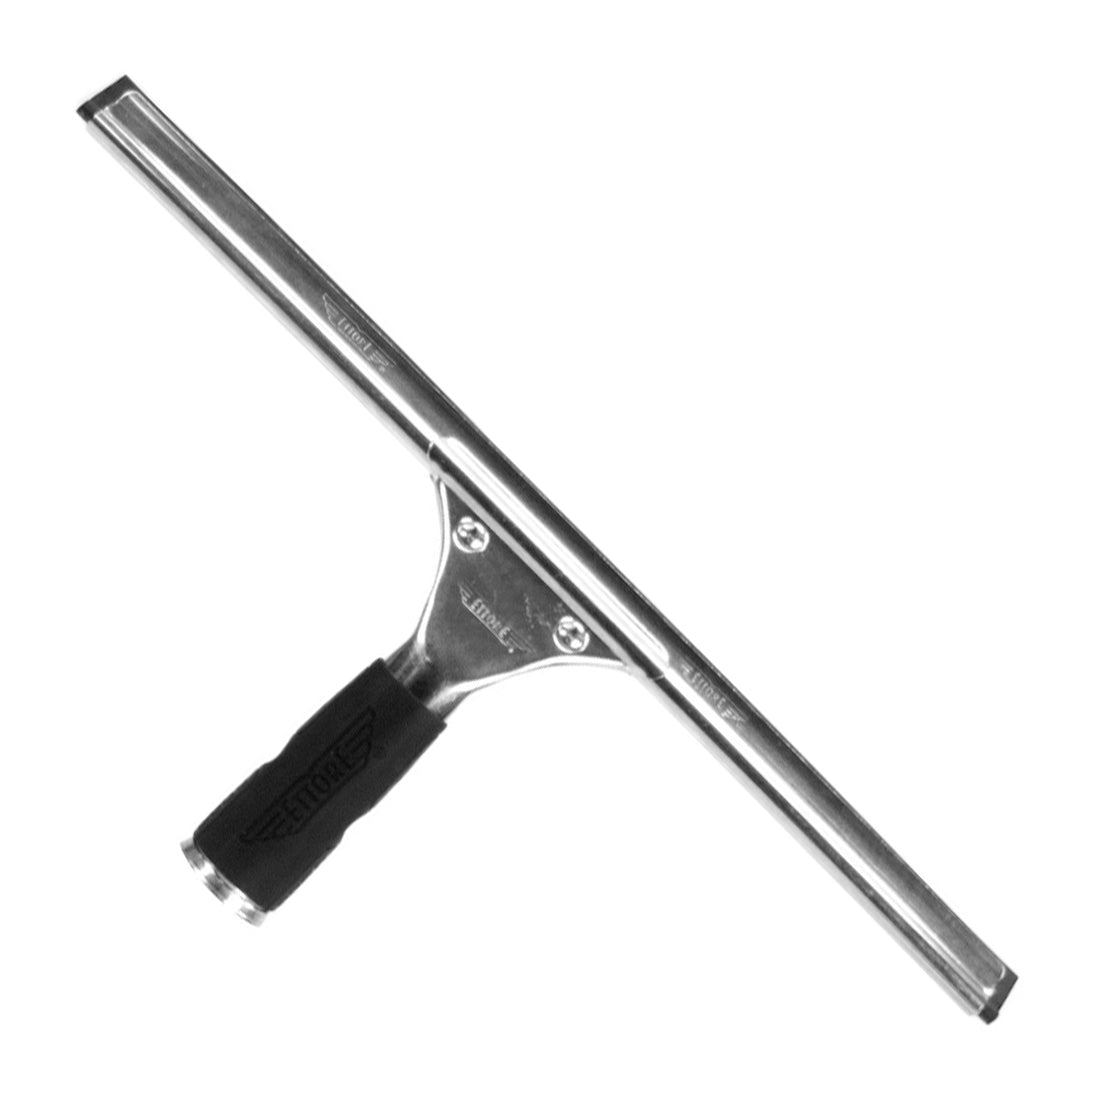 Ettore Stainless Steel with Rubber Grip Squeegee, Completes